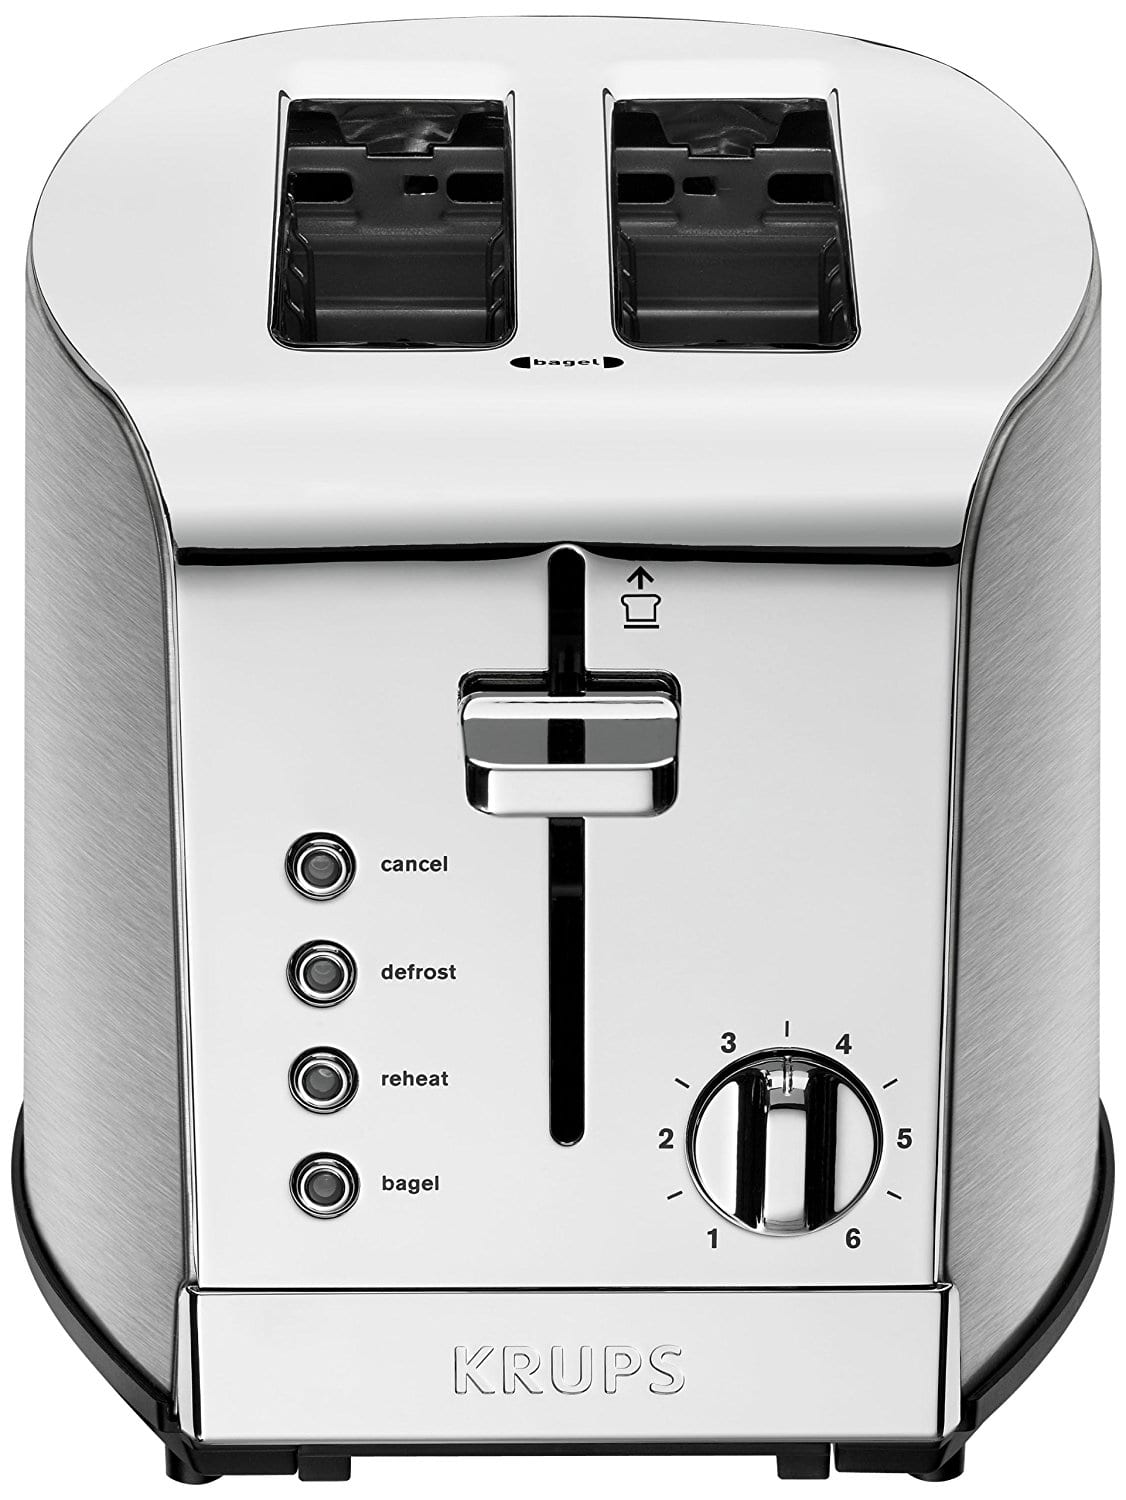 Best Toasters 2017: KRUPS Stainless Steel Wide Slot Toaster 2018